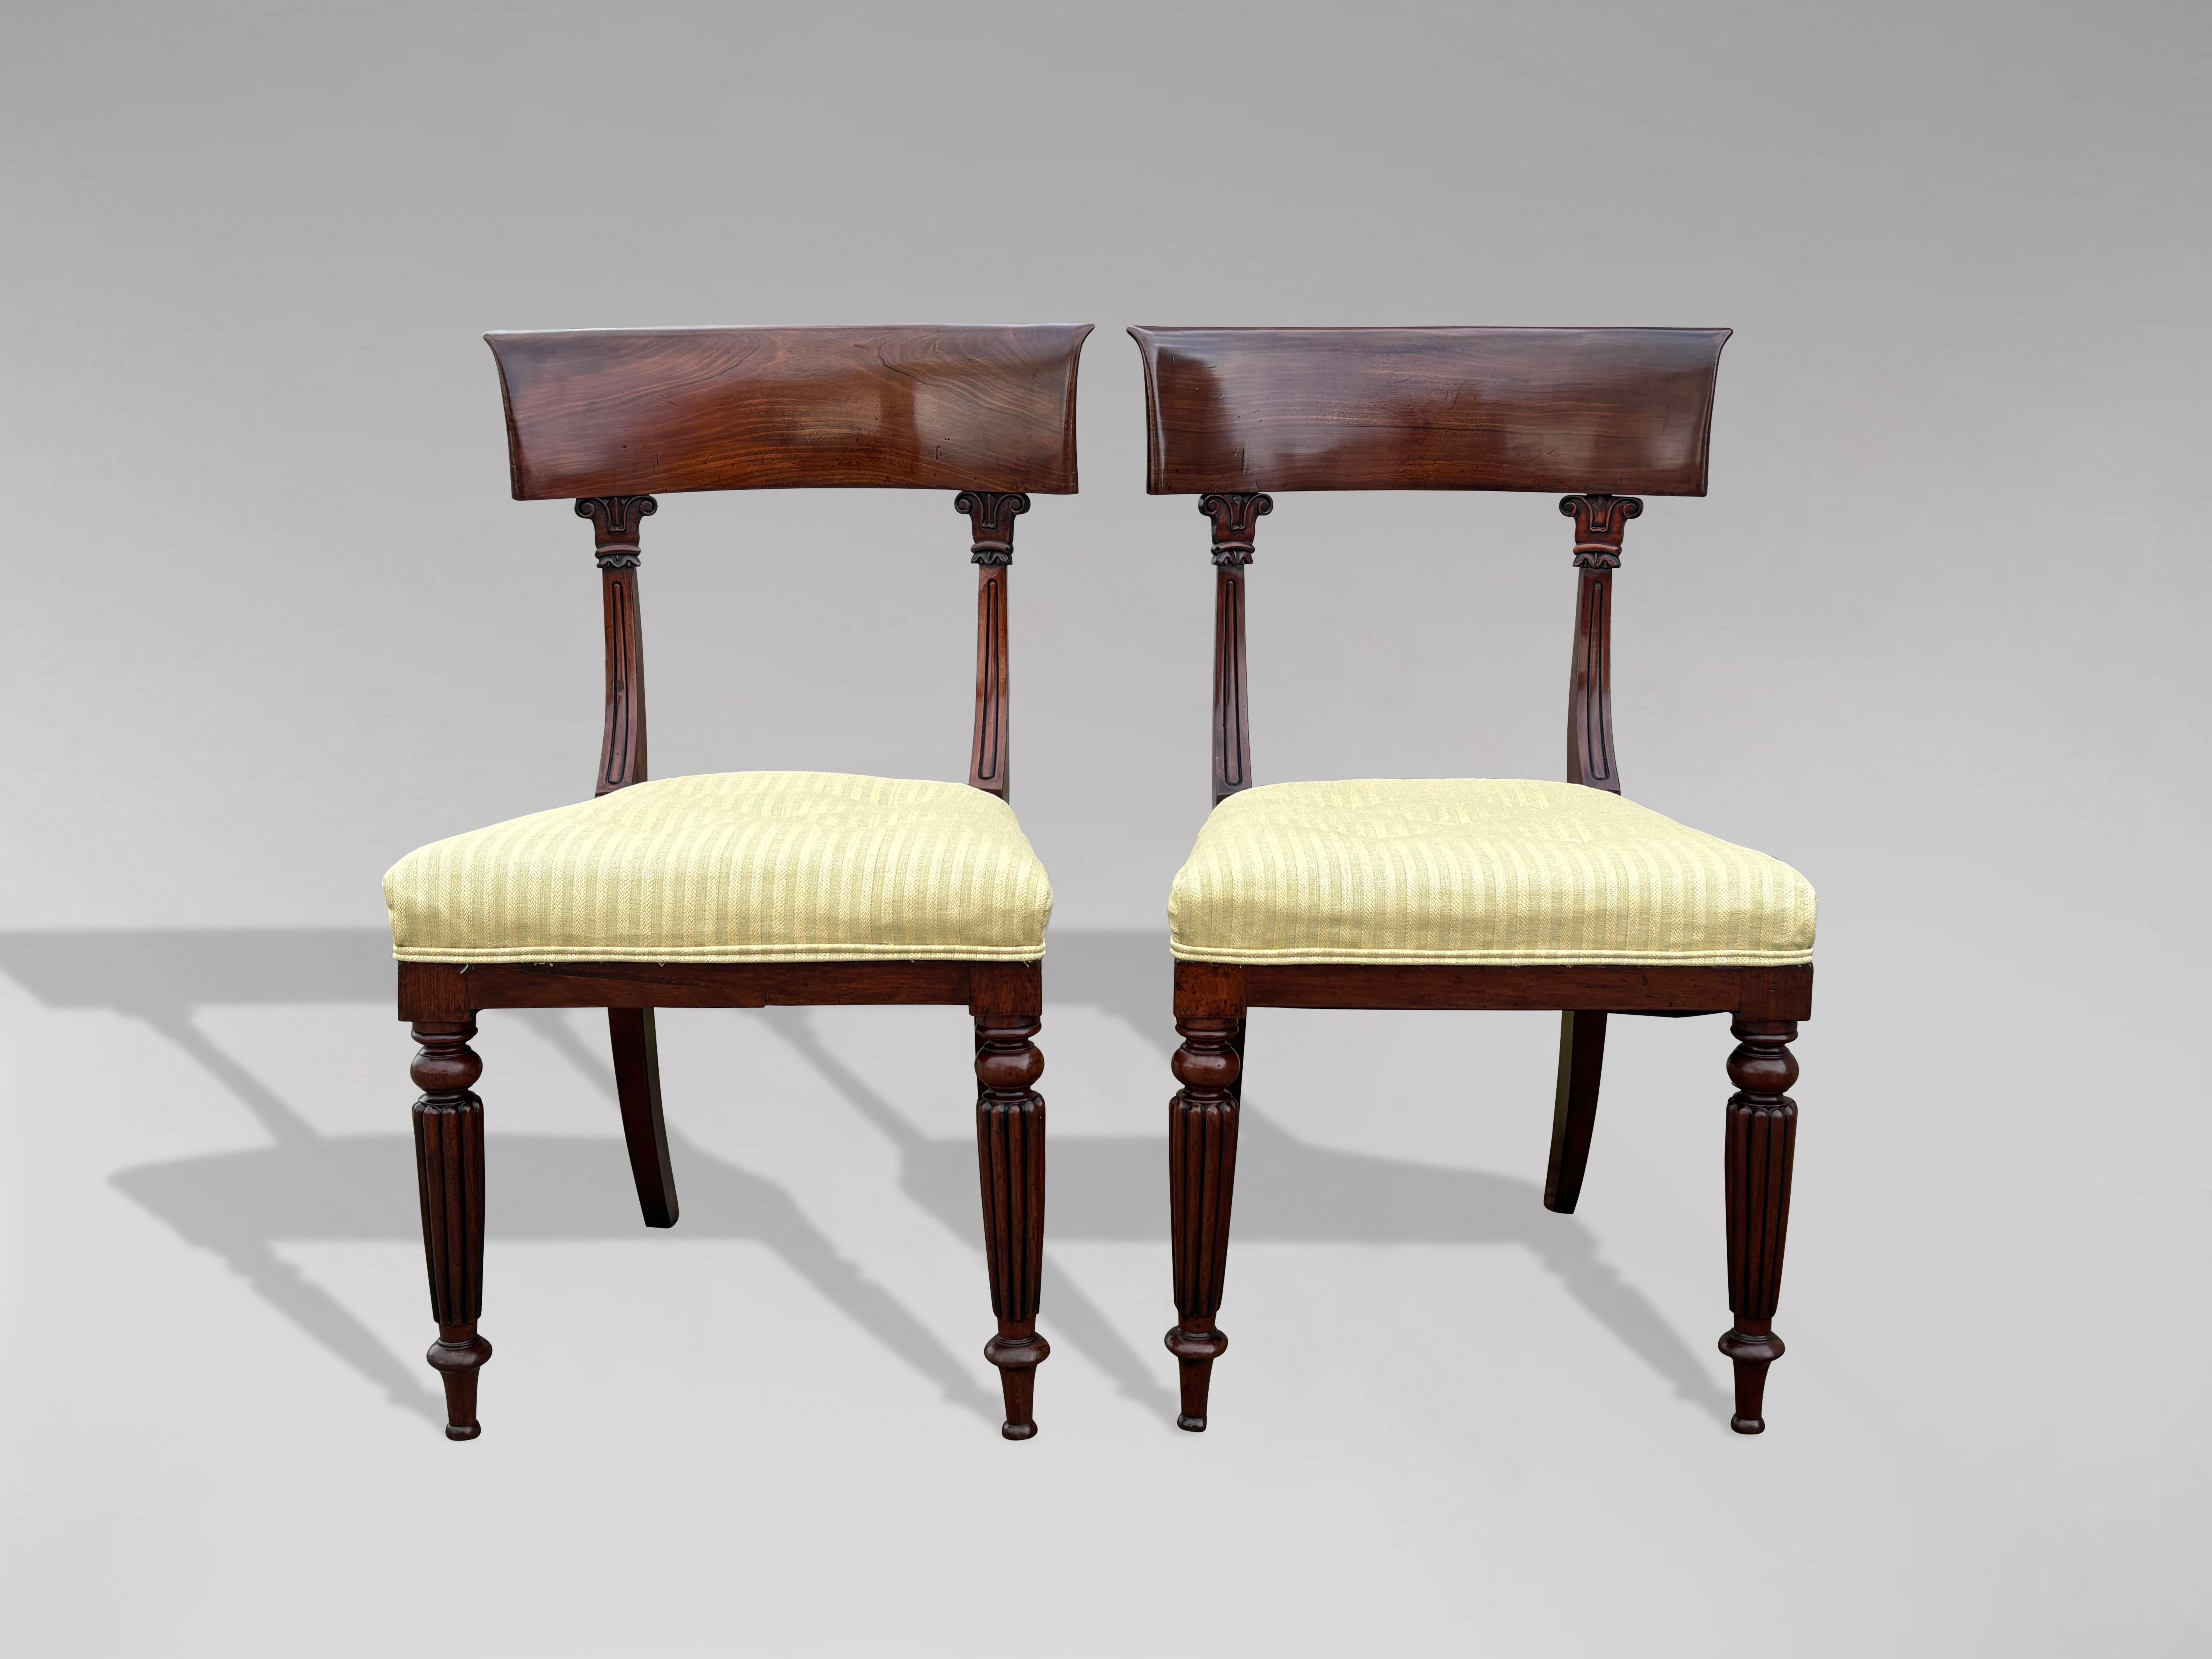 A pair of 19th century William IV period fine quality solid mahogany bar back side chairs with newly upholstered seats, in excellent condition. These strong chairs are designed with an attractive curved bar back connected to shaped, carved reeded